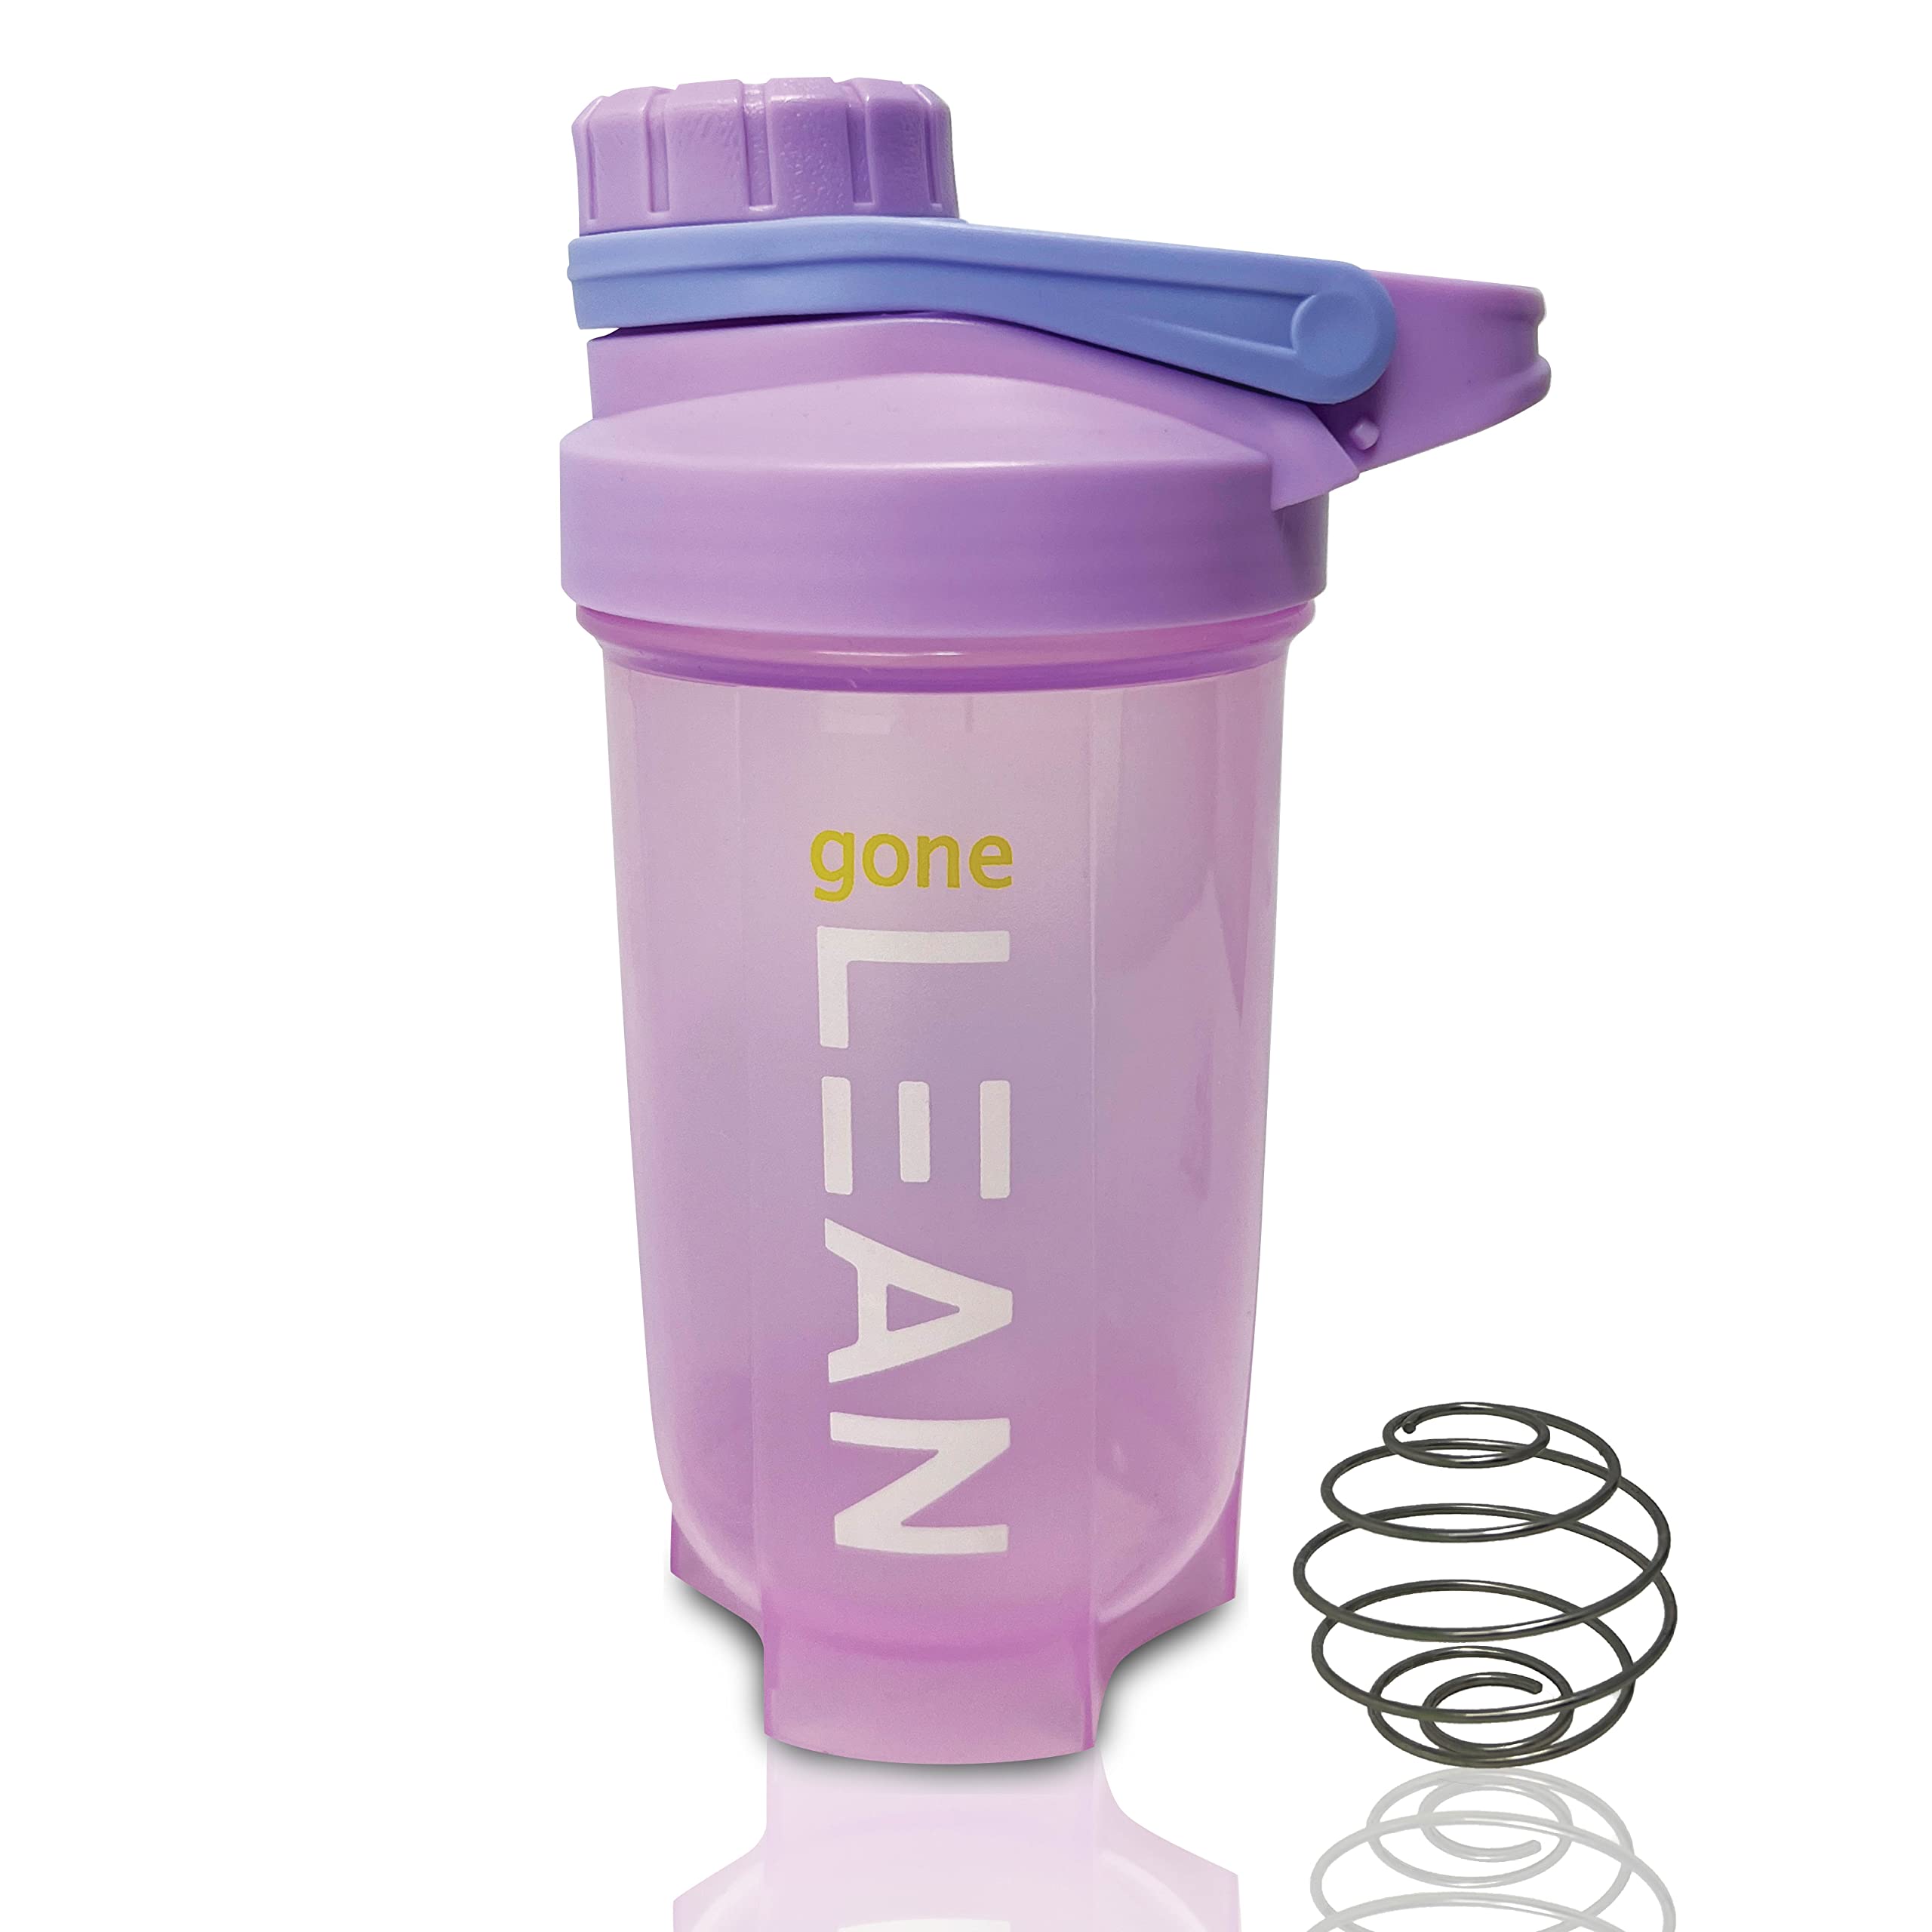 gone LEAN Protein Shaker Bottle 500ml with Mixing Ball & Curved Base | Leakproof Shaker for Protein Shakes | Protein Bottle | Gym Shaker | Mix Bottle | Shaker Bottle for Protein Shakes (Purple)